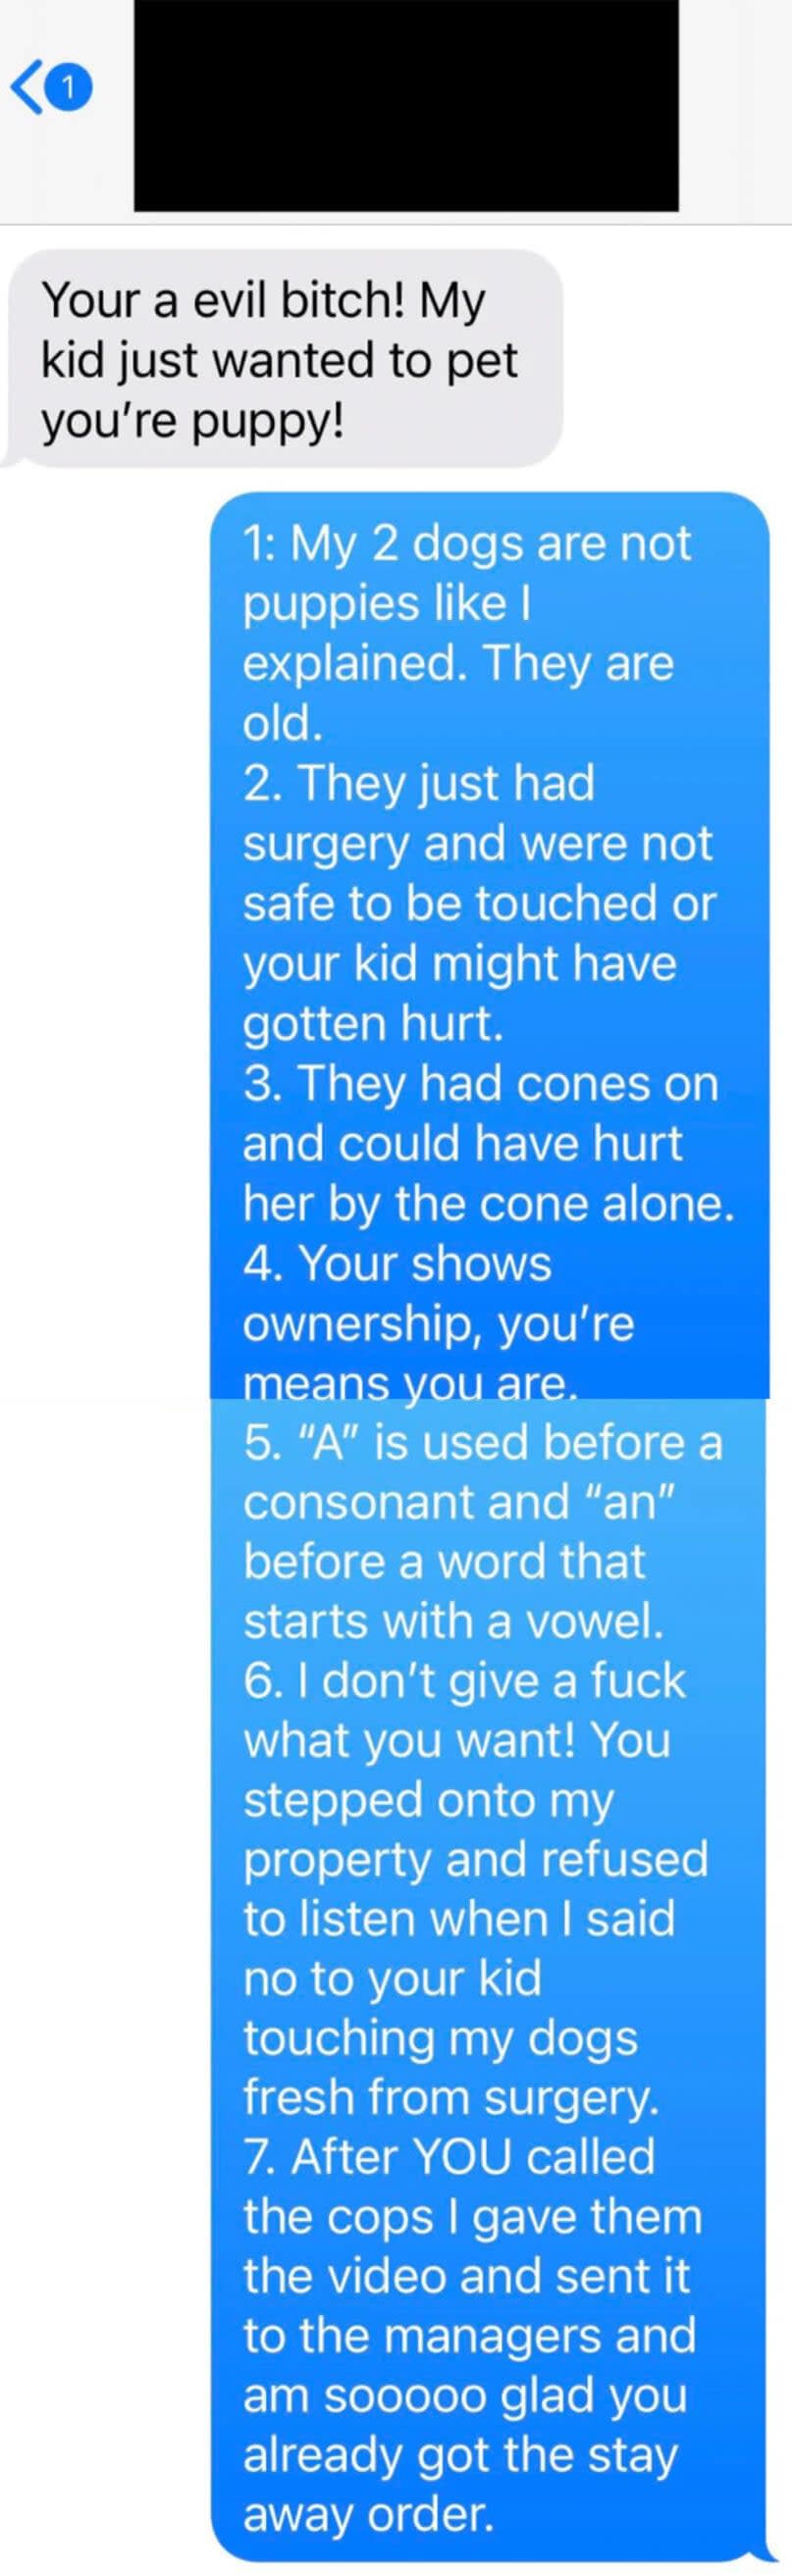 person texts dog-owner angry their kids couldn't pet their "puppies" and the person explains their dogs are old, not puppies, and that they just got out of surgery — they then mention the person calling the cops on them and correct their grammar